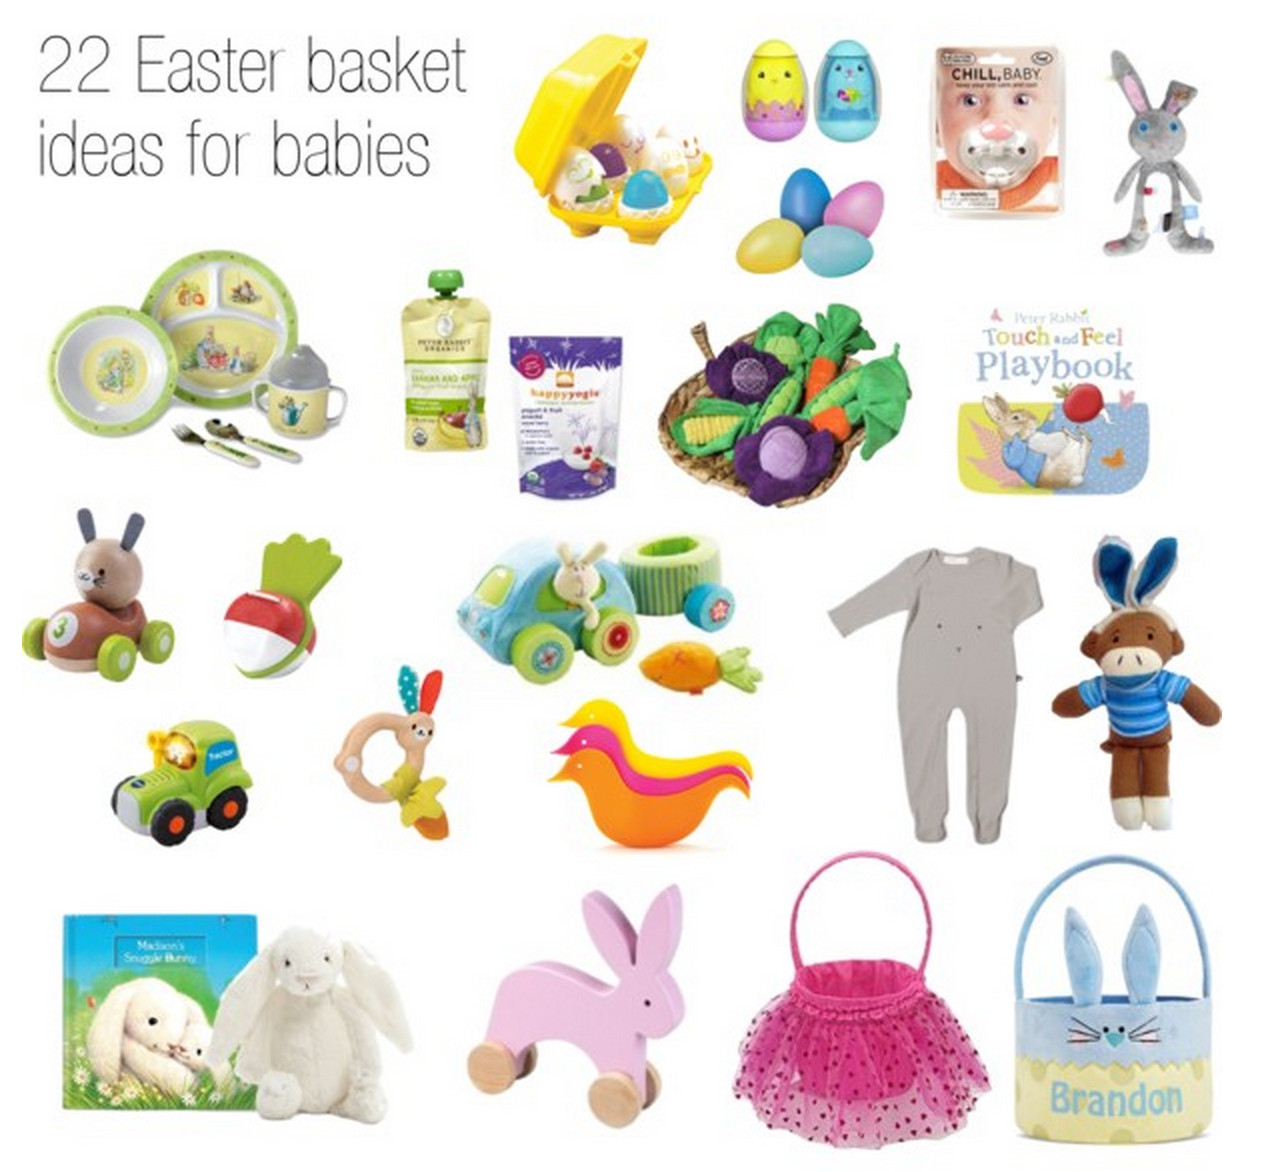 Gift Ideas For Baby'S First Easter
 22 Adorable Easter basket ideas for babies